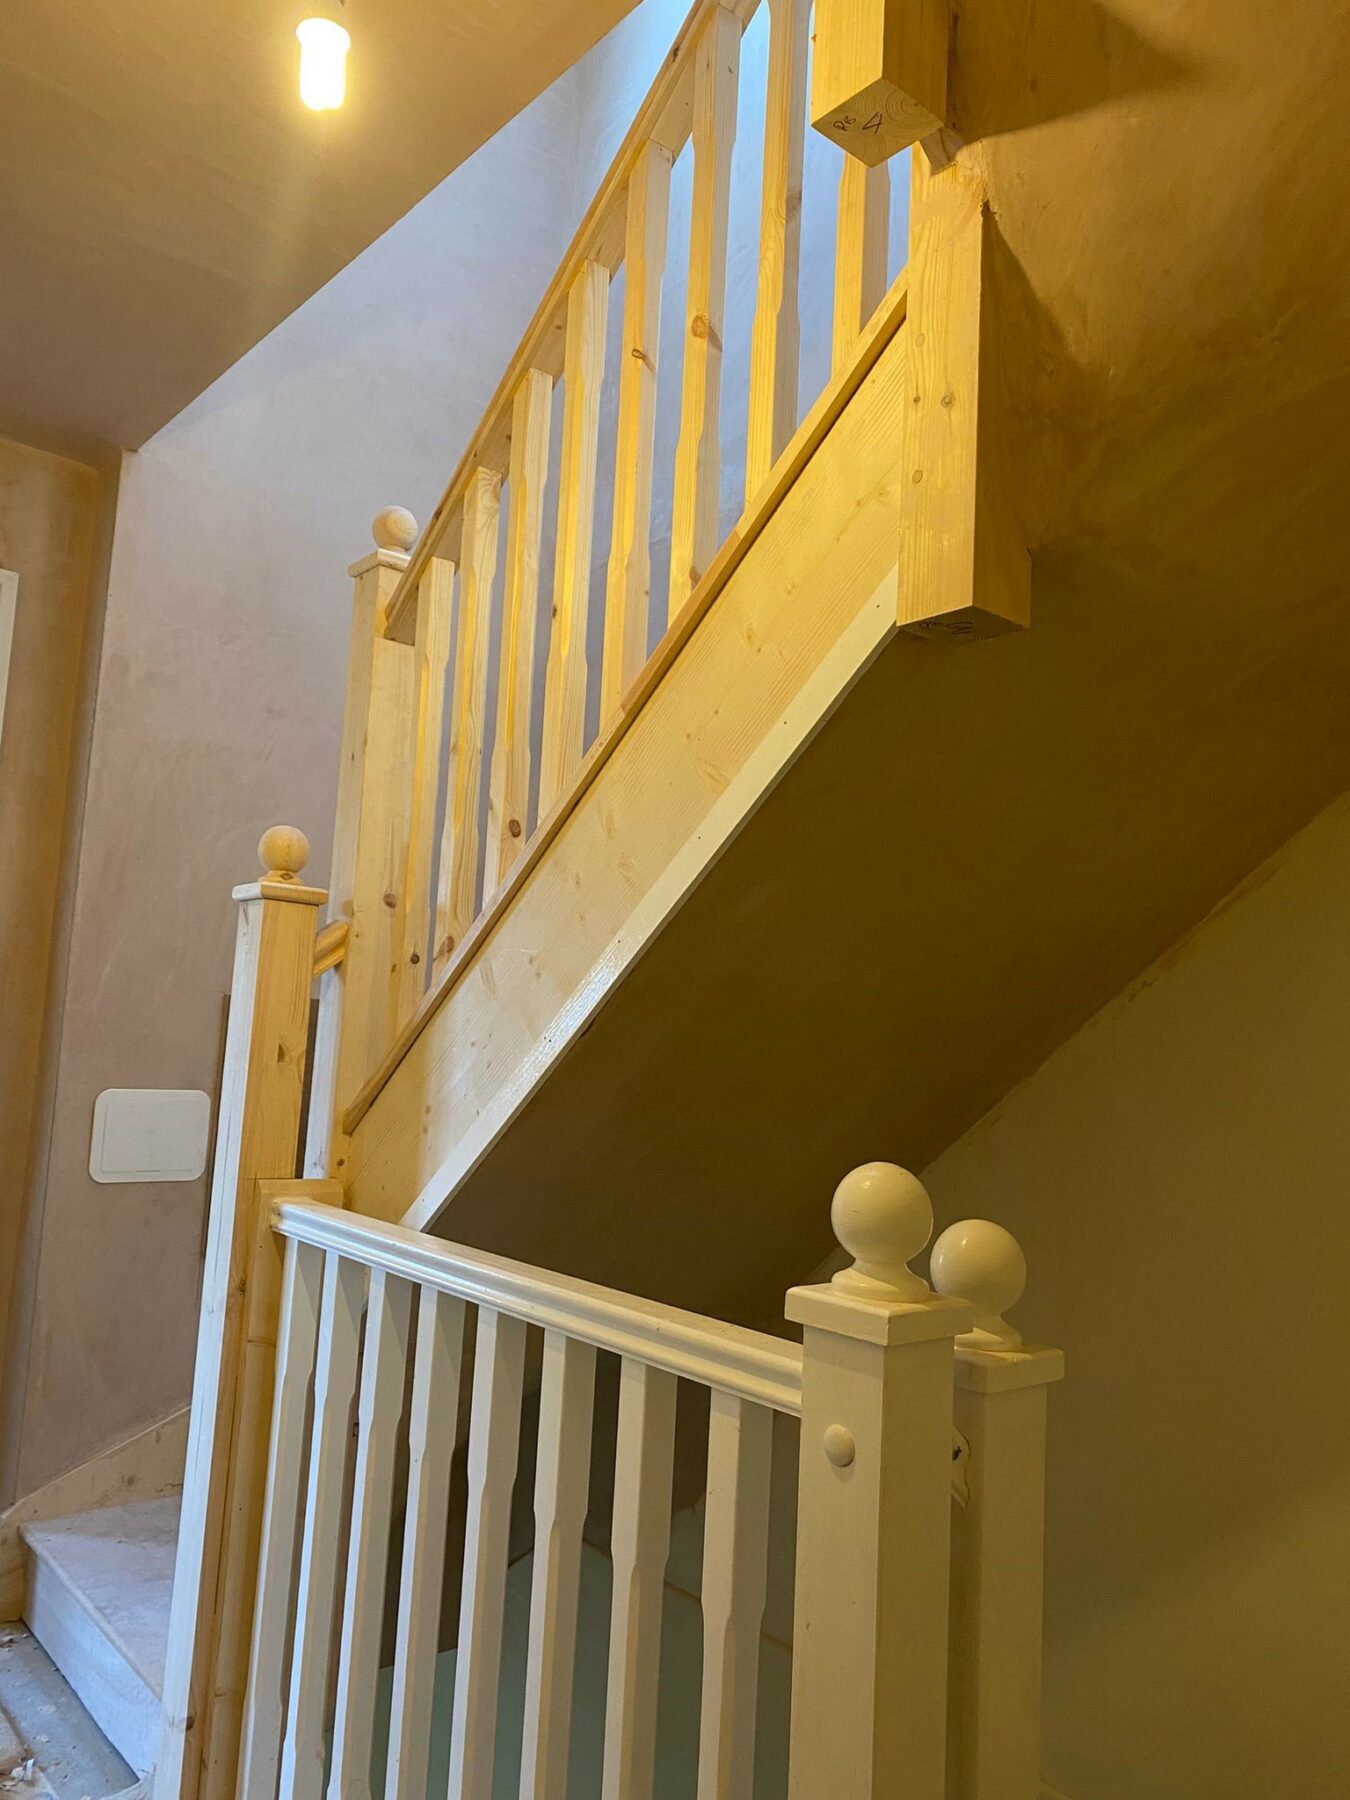 Newly built staircase and balustrades in house